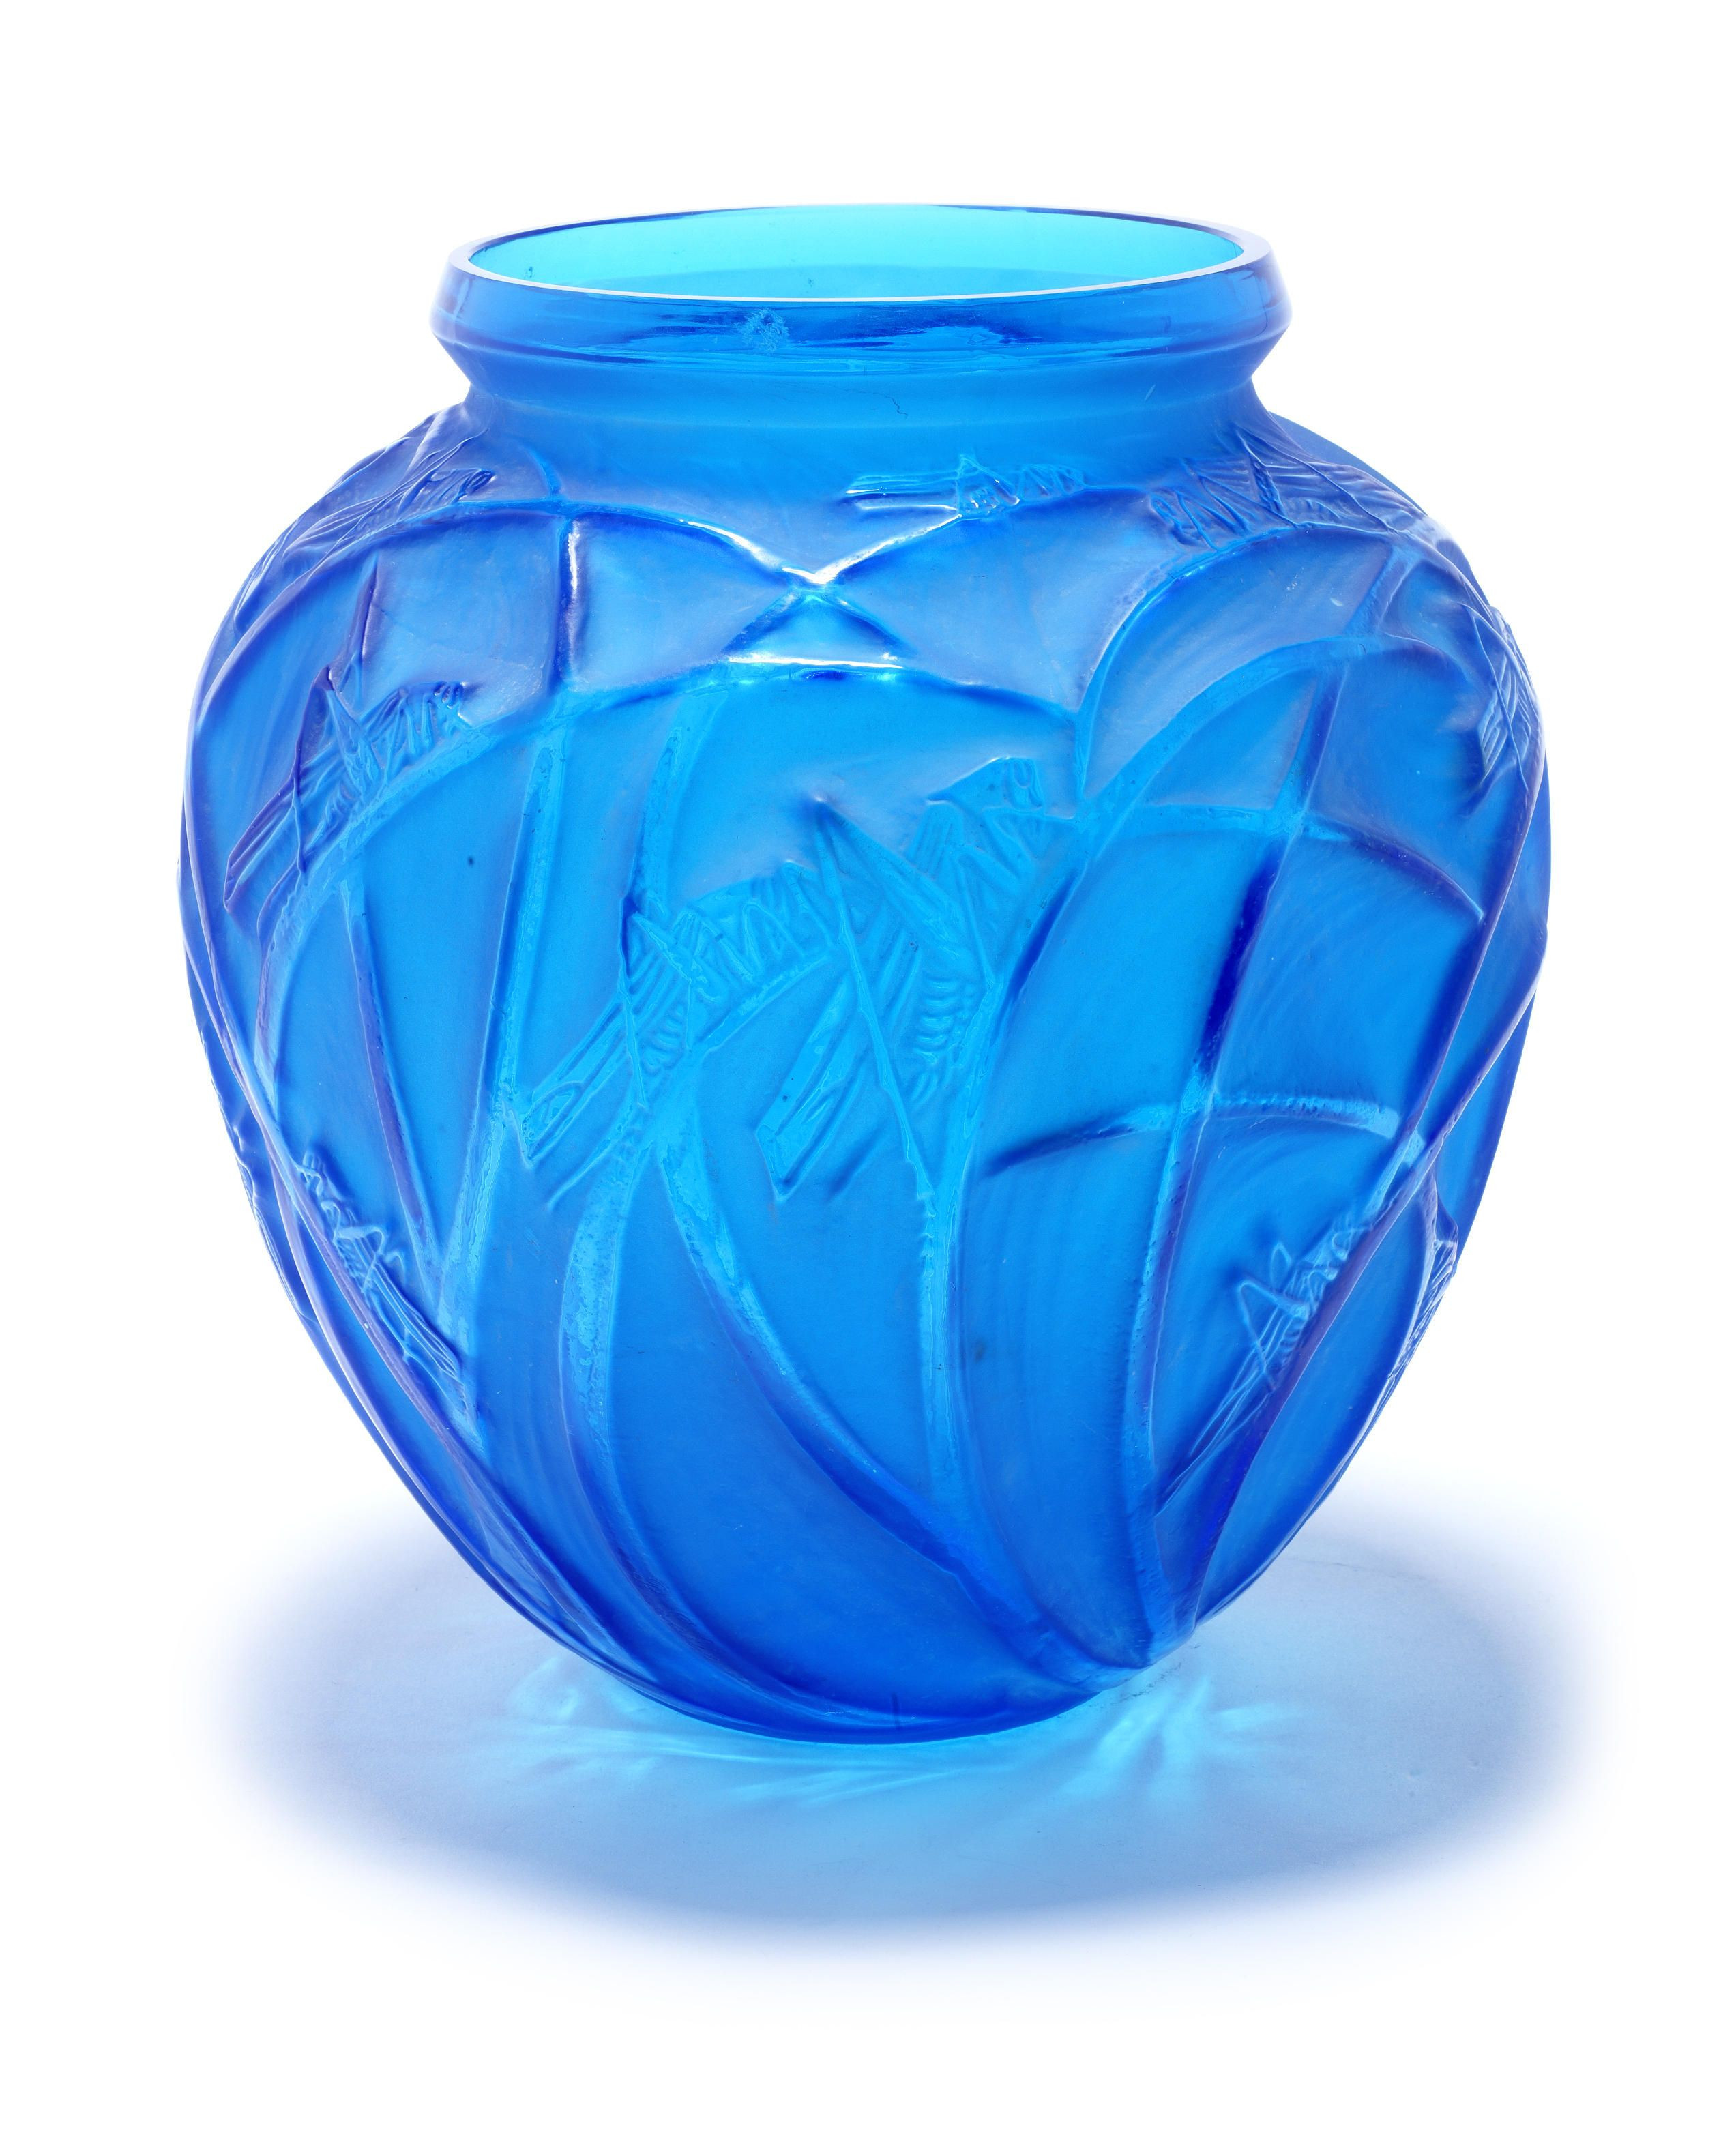 Clear Colored Glass Vases Of Rena Lalique Sauterelles A Vase Design 1913 Electric Blue Glass In Glass Art